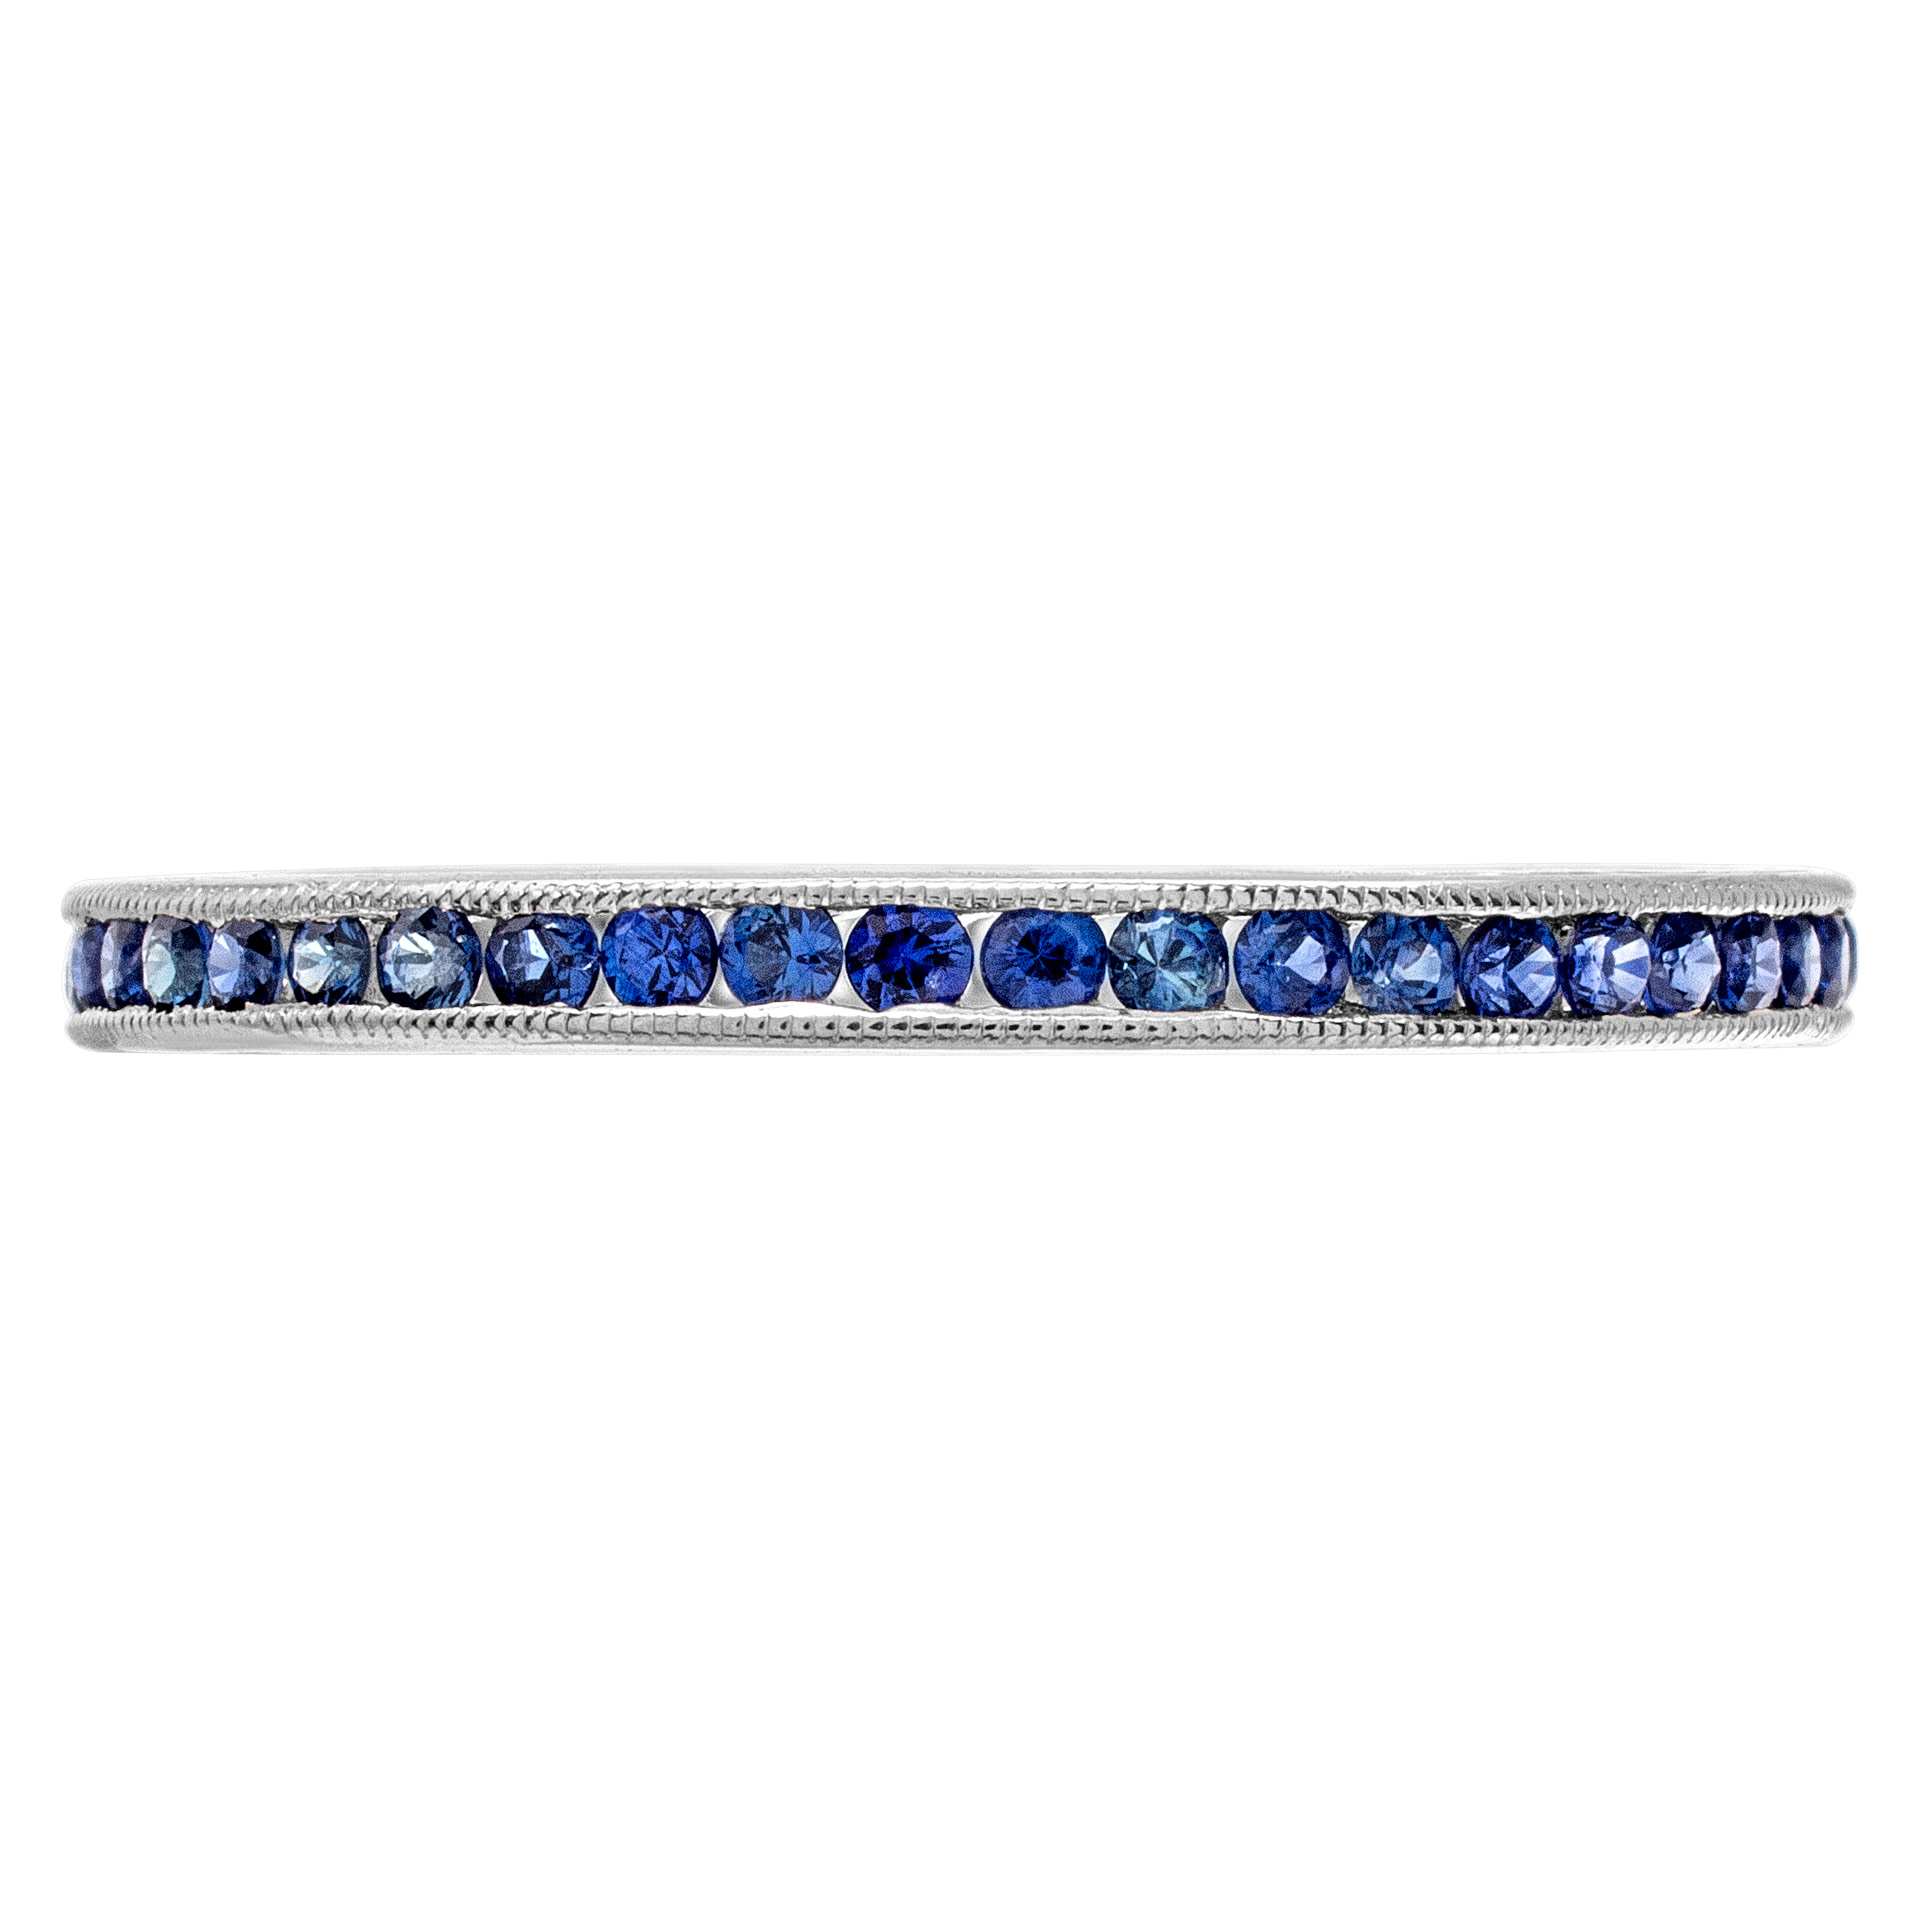 18k white gold eternity band with blue sapphires.